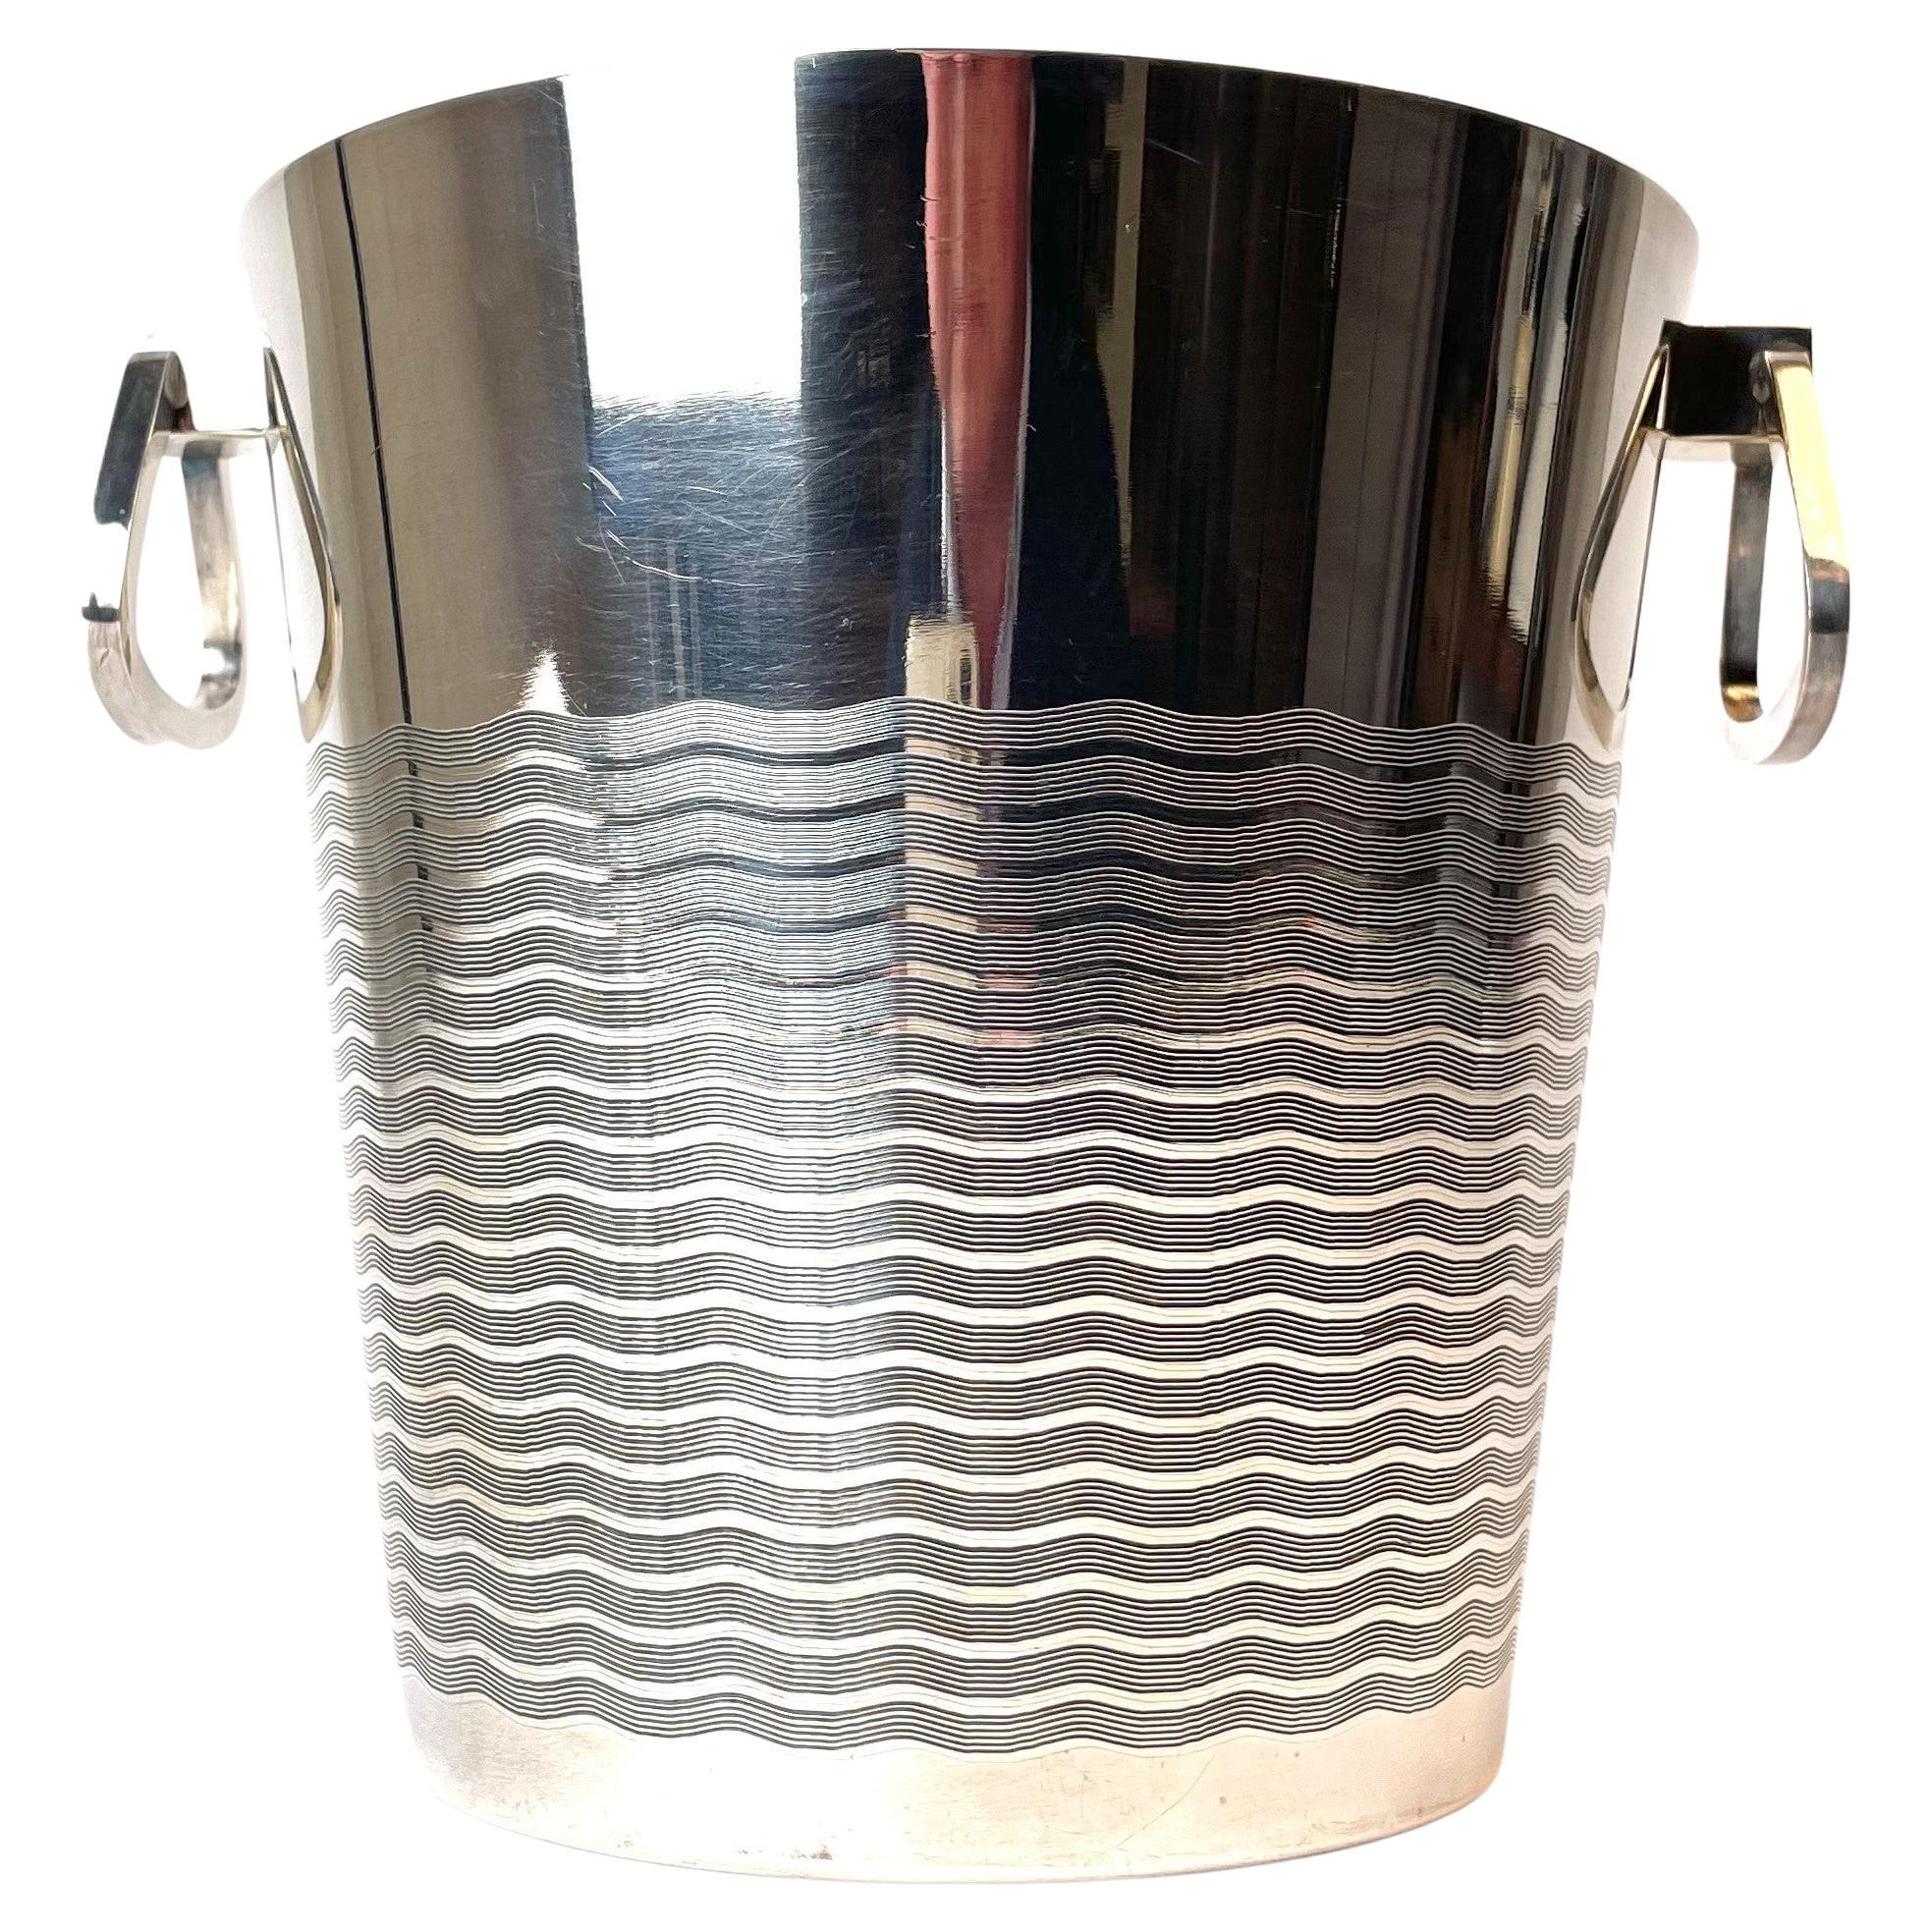 Elegant Wine Cooler with Decor of Waves from 1930s-1940s